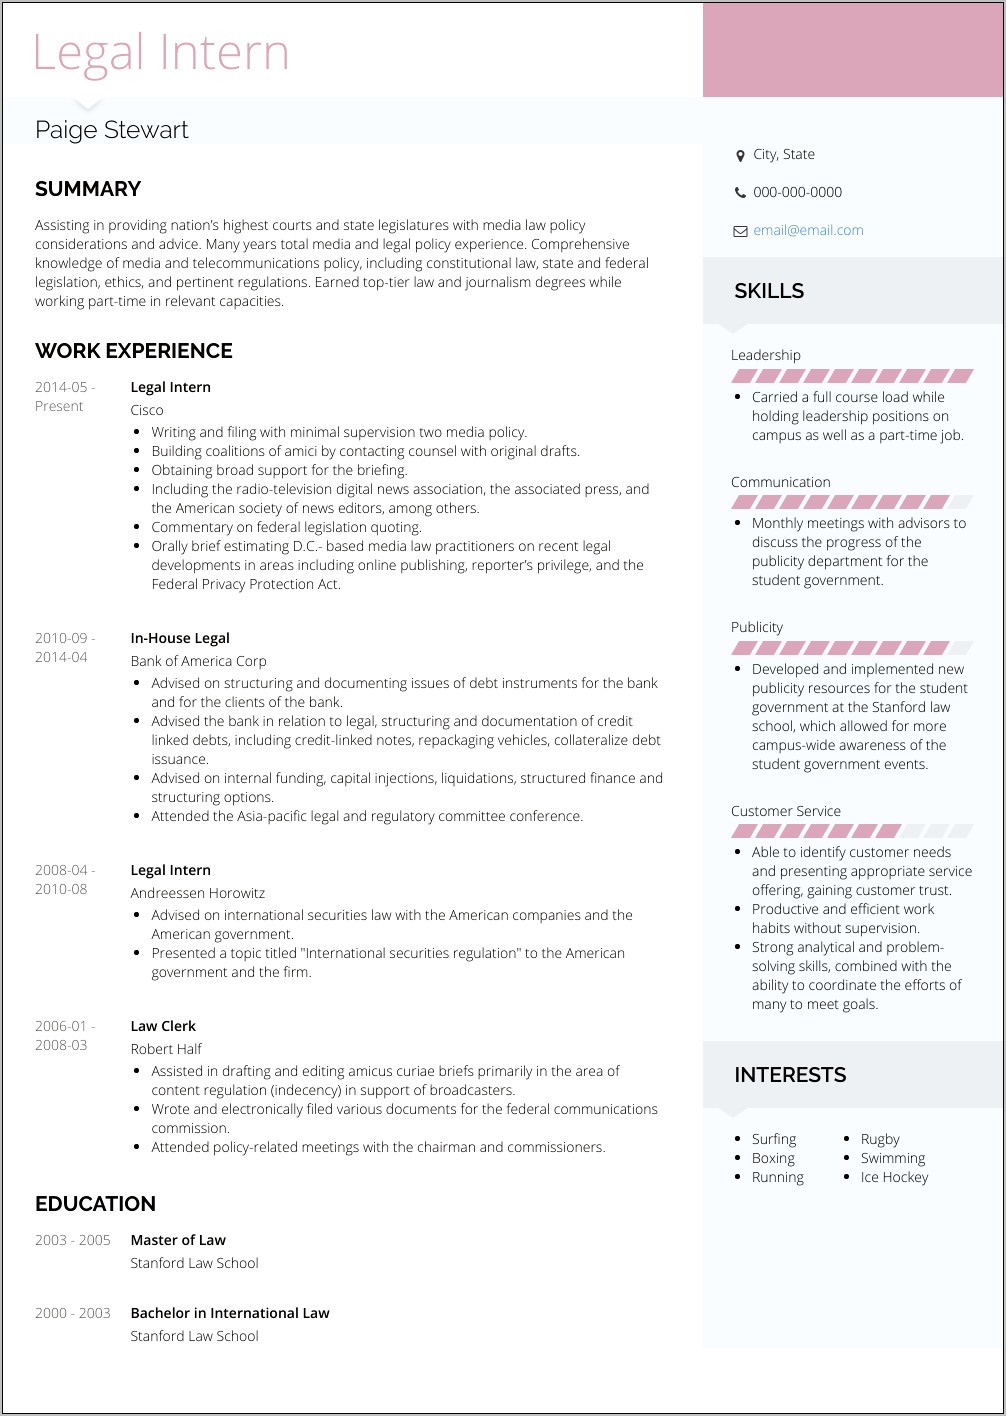 Objective Resume Part Time While In School